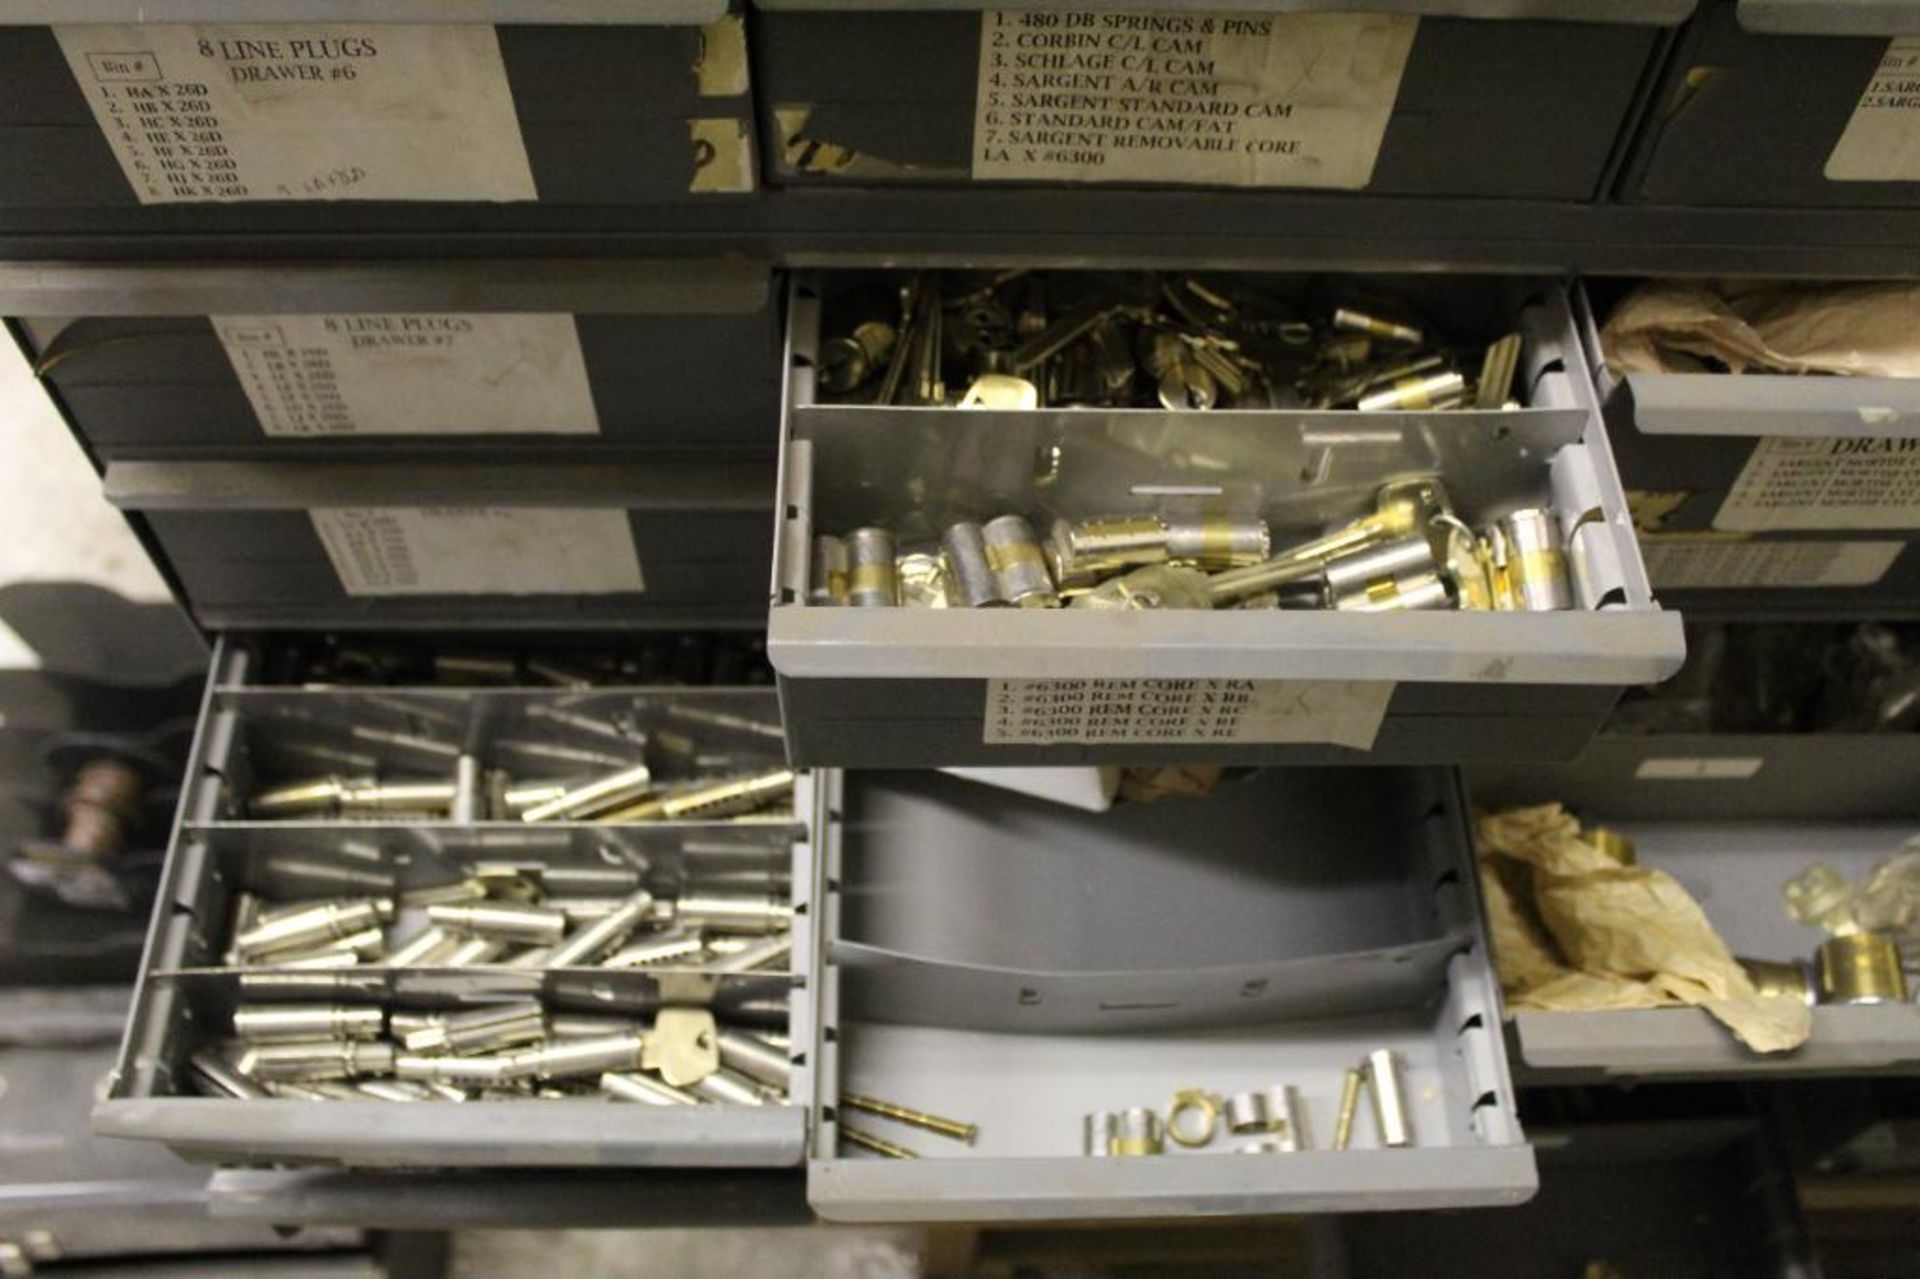 48-Drawer Organizer with Assorted Plugs, Cylinders, Mortise Cylinders, Cams and Shells. - Image 15 of 20